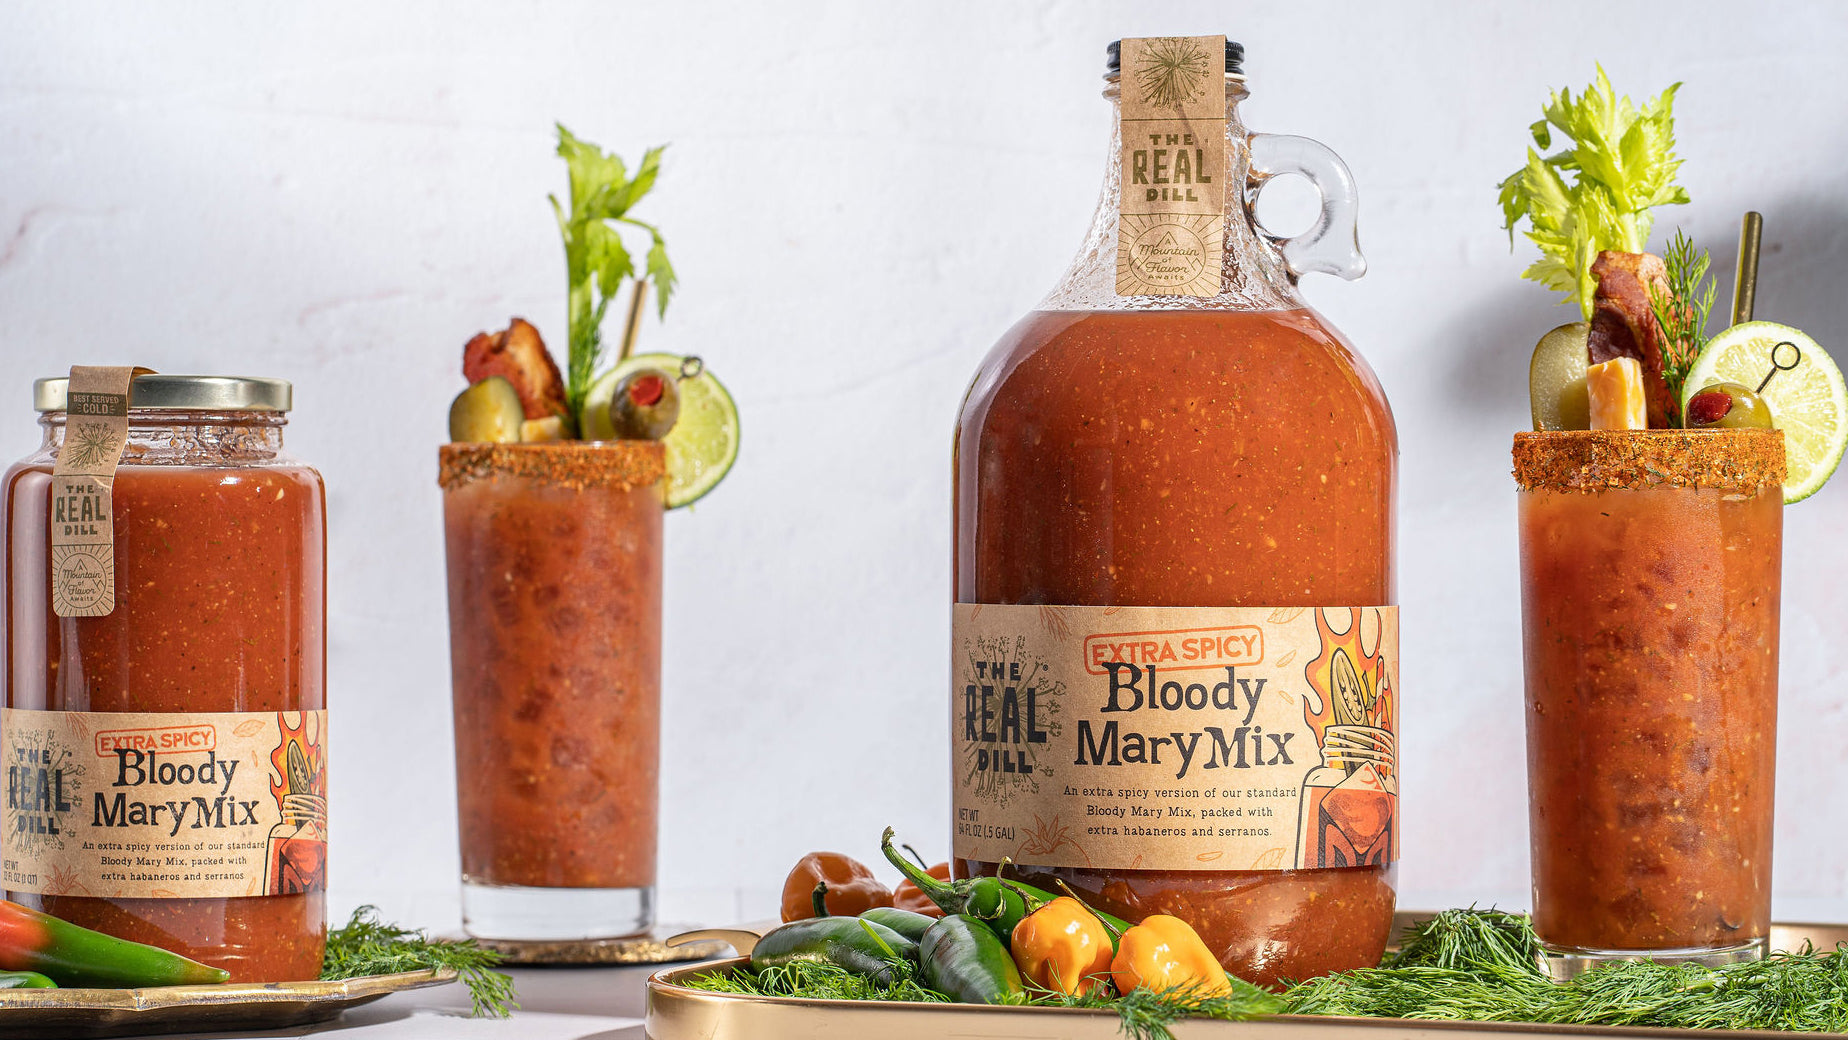 Beat the Cold with Extra Spicy Bloody Mary Mix